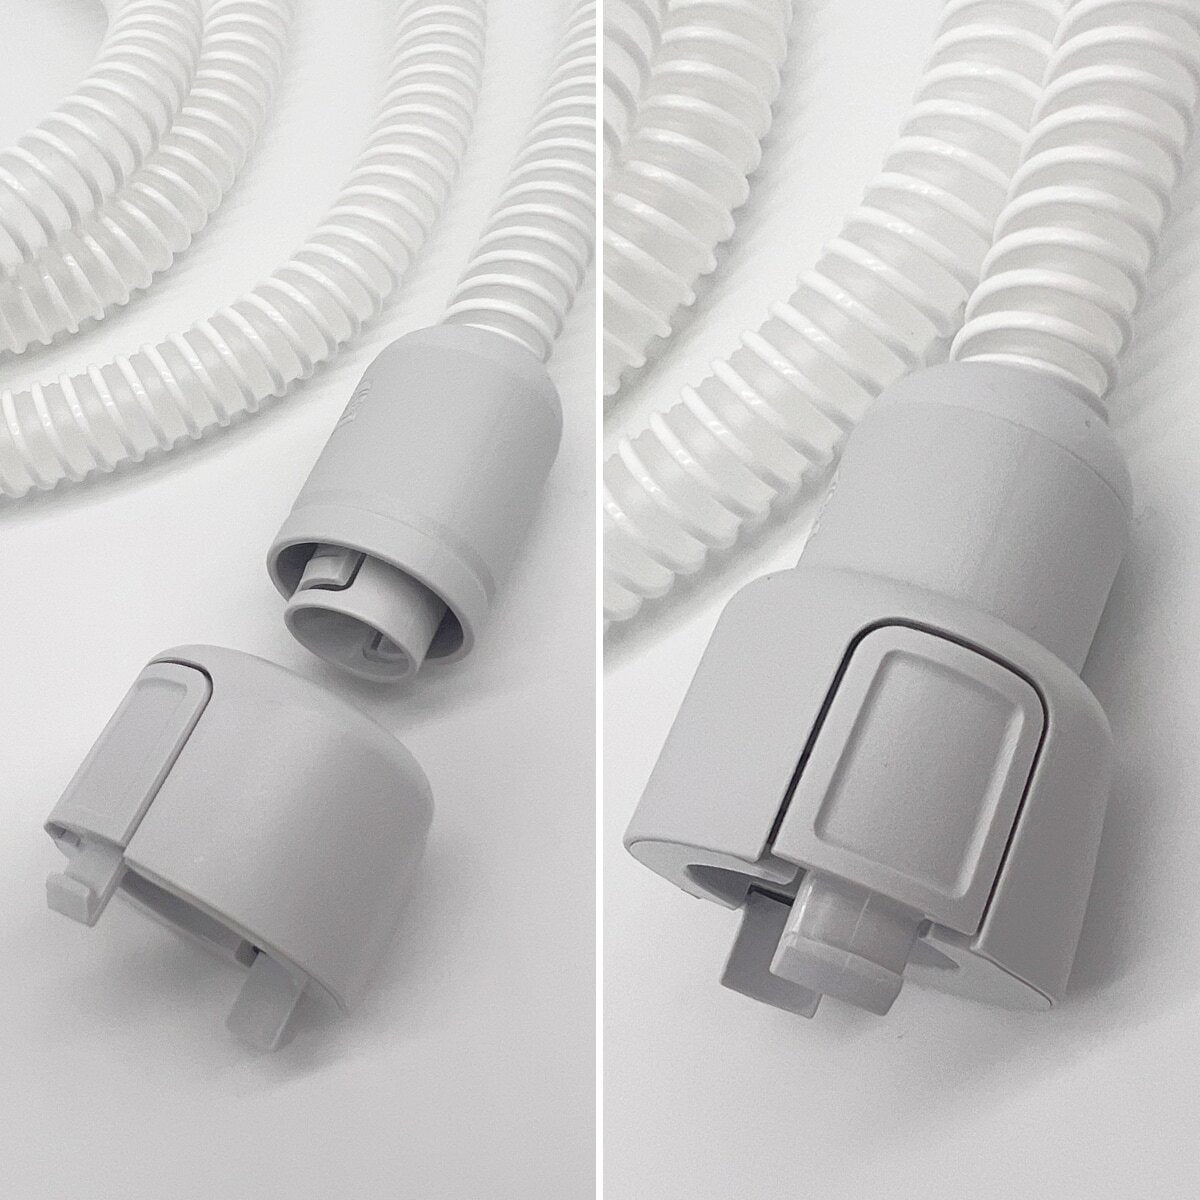 12MM Non-Heated Tubing Adapter for DreamStation 2 Series CPAP/BiPAP Machines